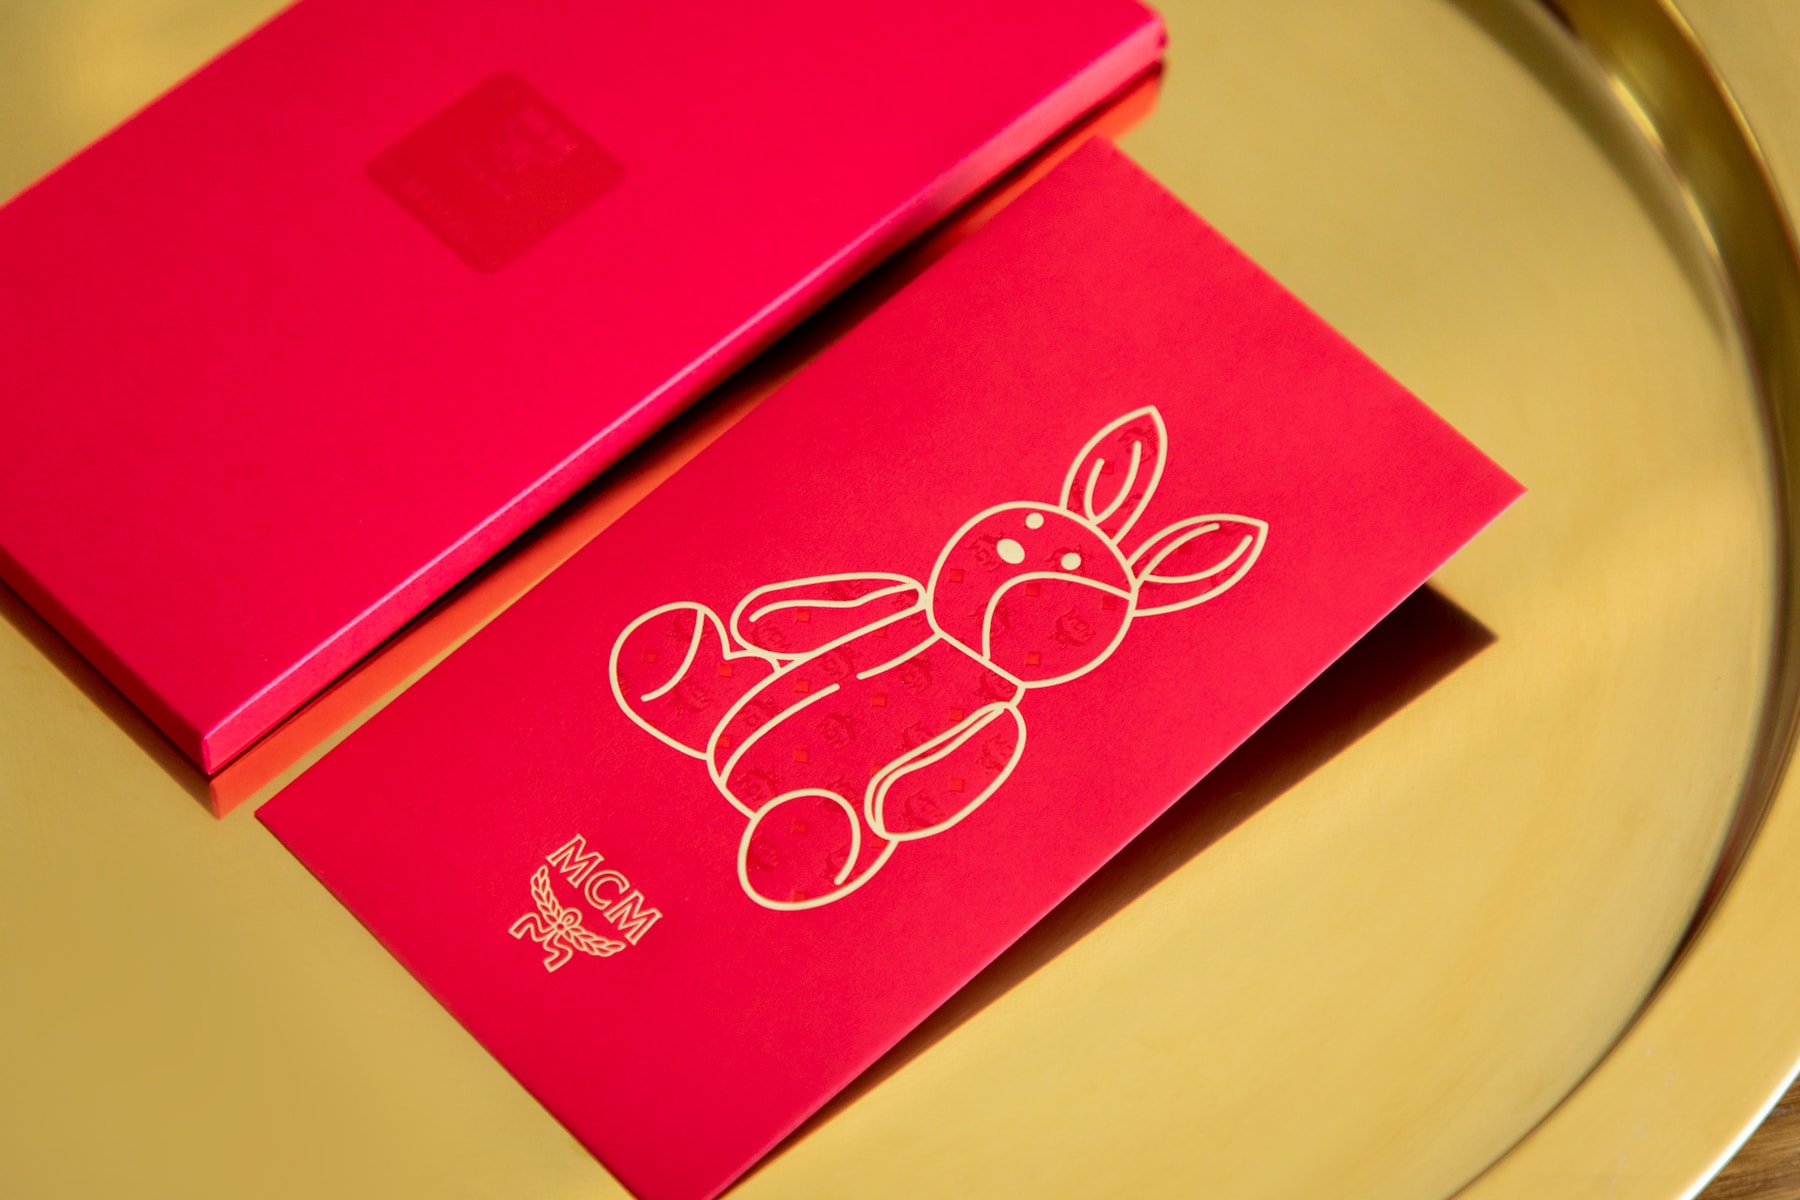 Here Are the Best Red Pockets for Year of the Rabbit Lunar New Year 2023 cny lunar new year chinese new year hong kong Audemars Piguet Valentino Hermes Rimowa Loro Piana Ferragamo Dior Chopard Zegna Nike Pramigiani Fleurier Kenzo Louis Vuitton Nespresso K11 x Bunney.